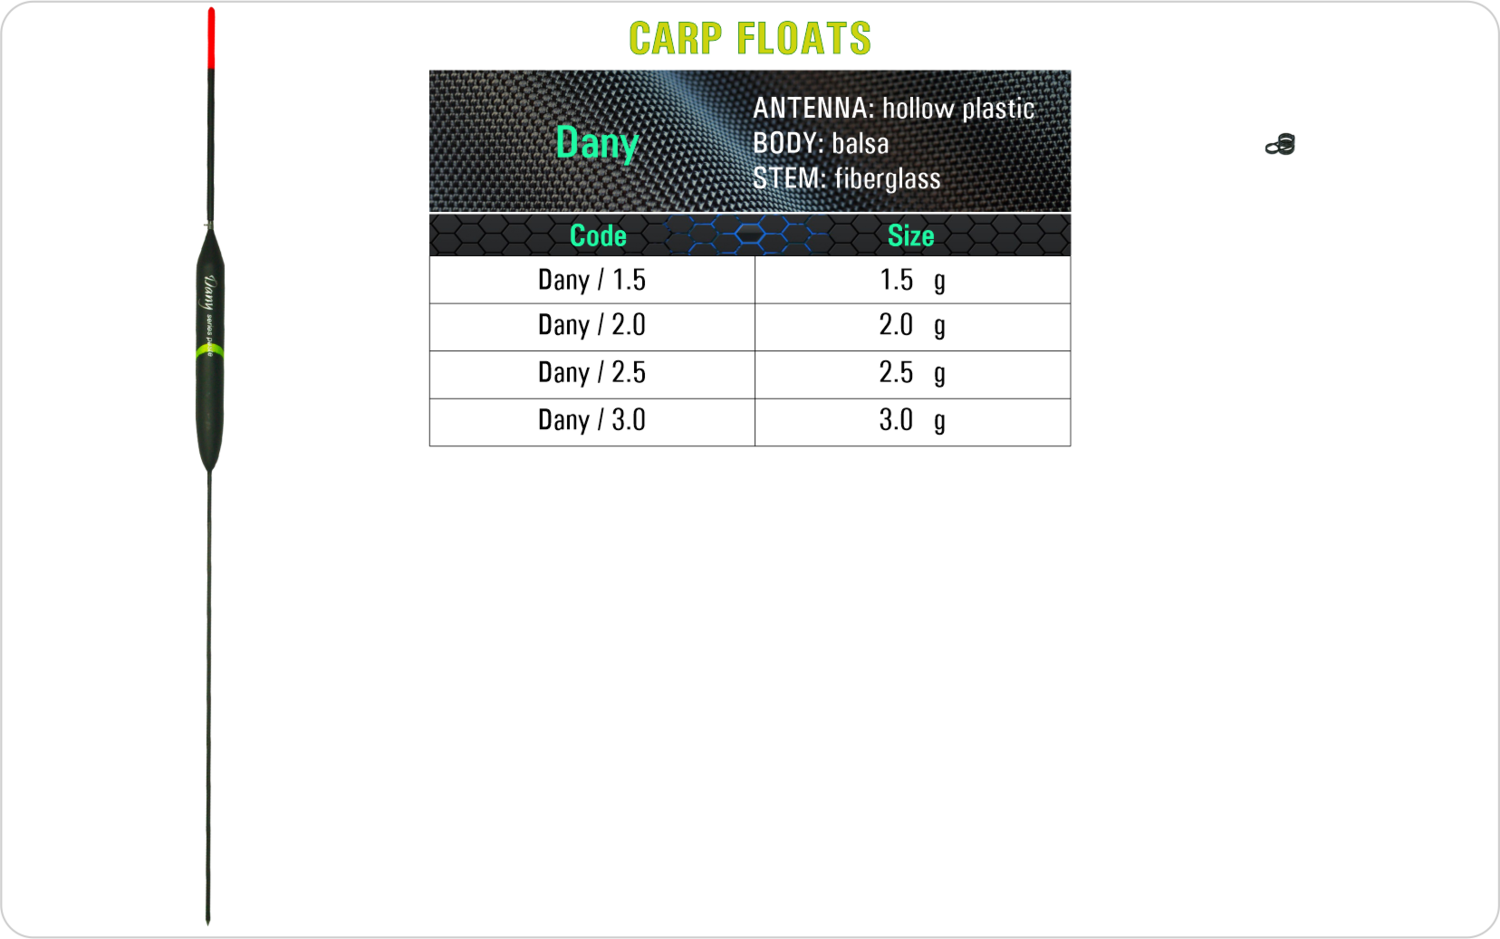 SF Dany Carp float model and table containing an additional information about this float with different codes, sizes, types of the body, the stem and the antenna of the float.